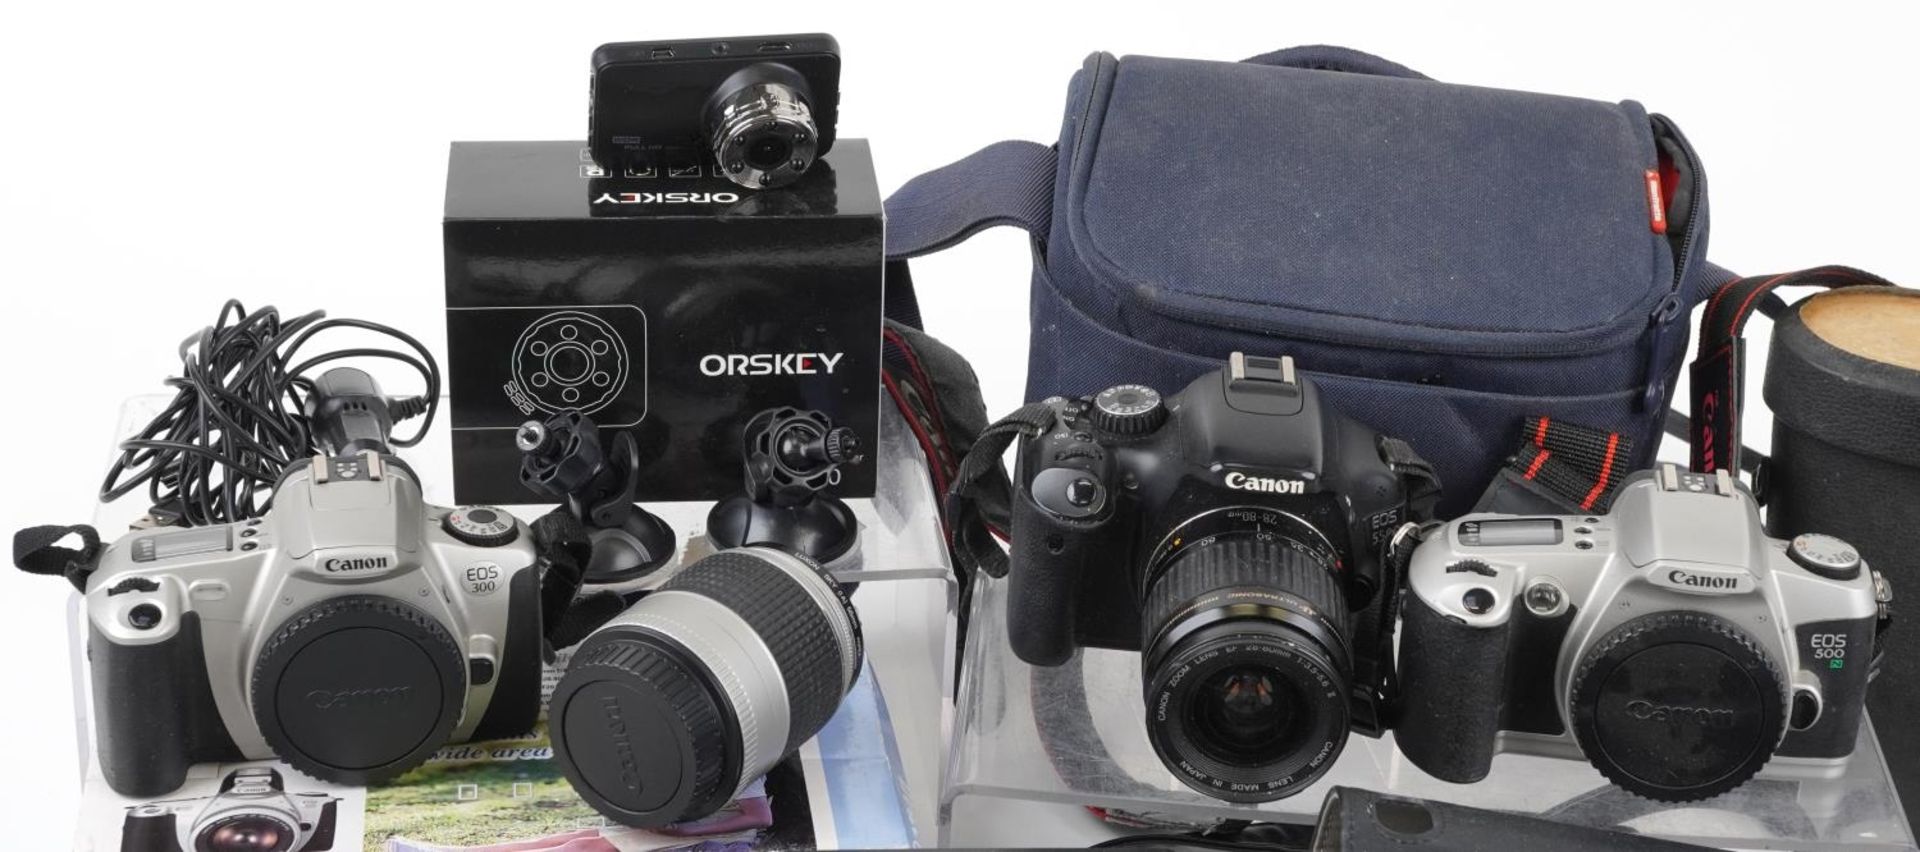 Vintage and later cameras, binoculars and an Orskey driving recorder with box including Canon EOS - Image 2 of 4